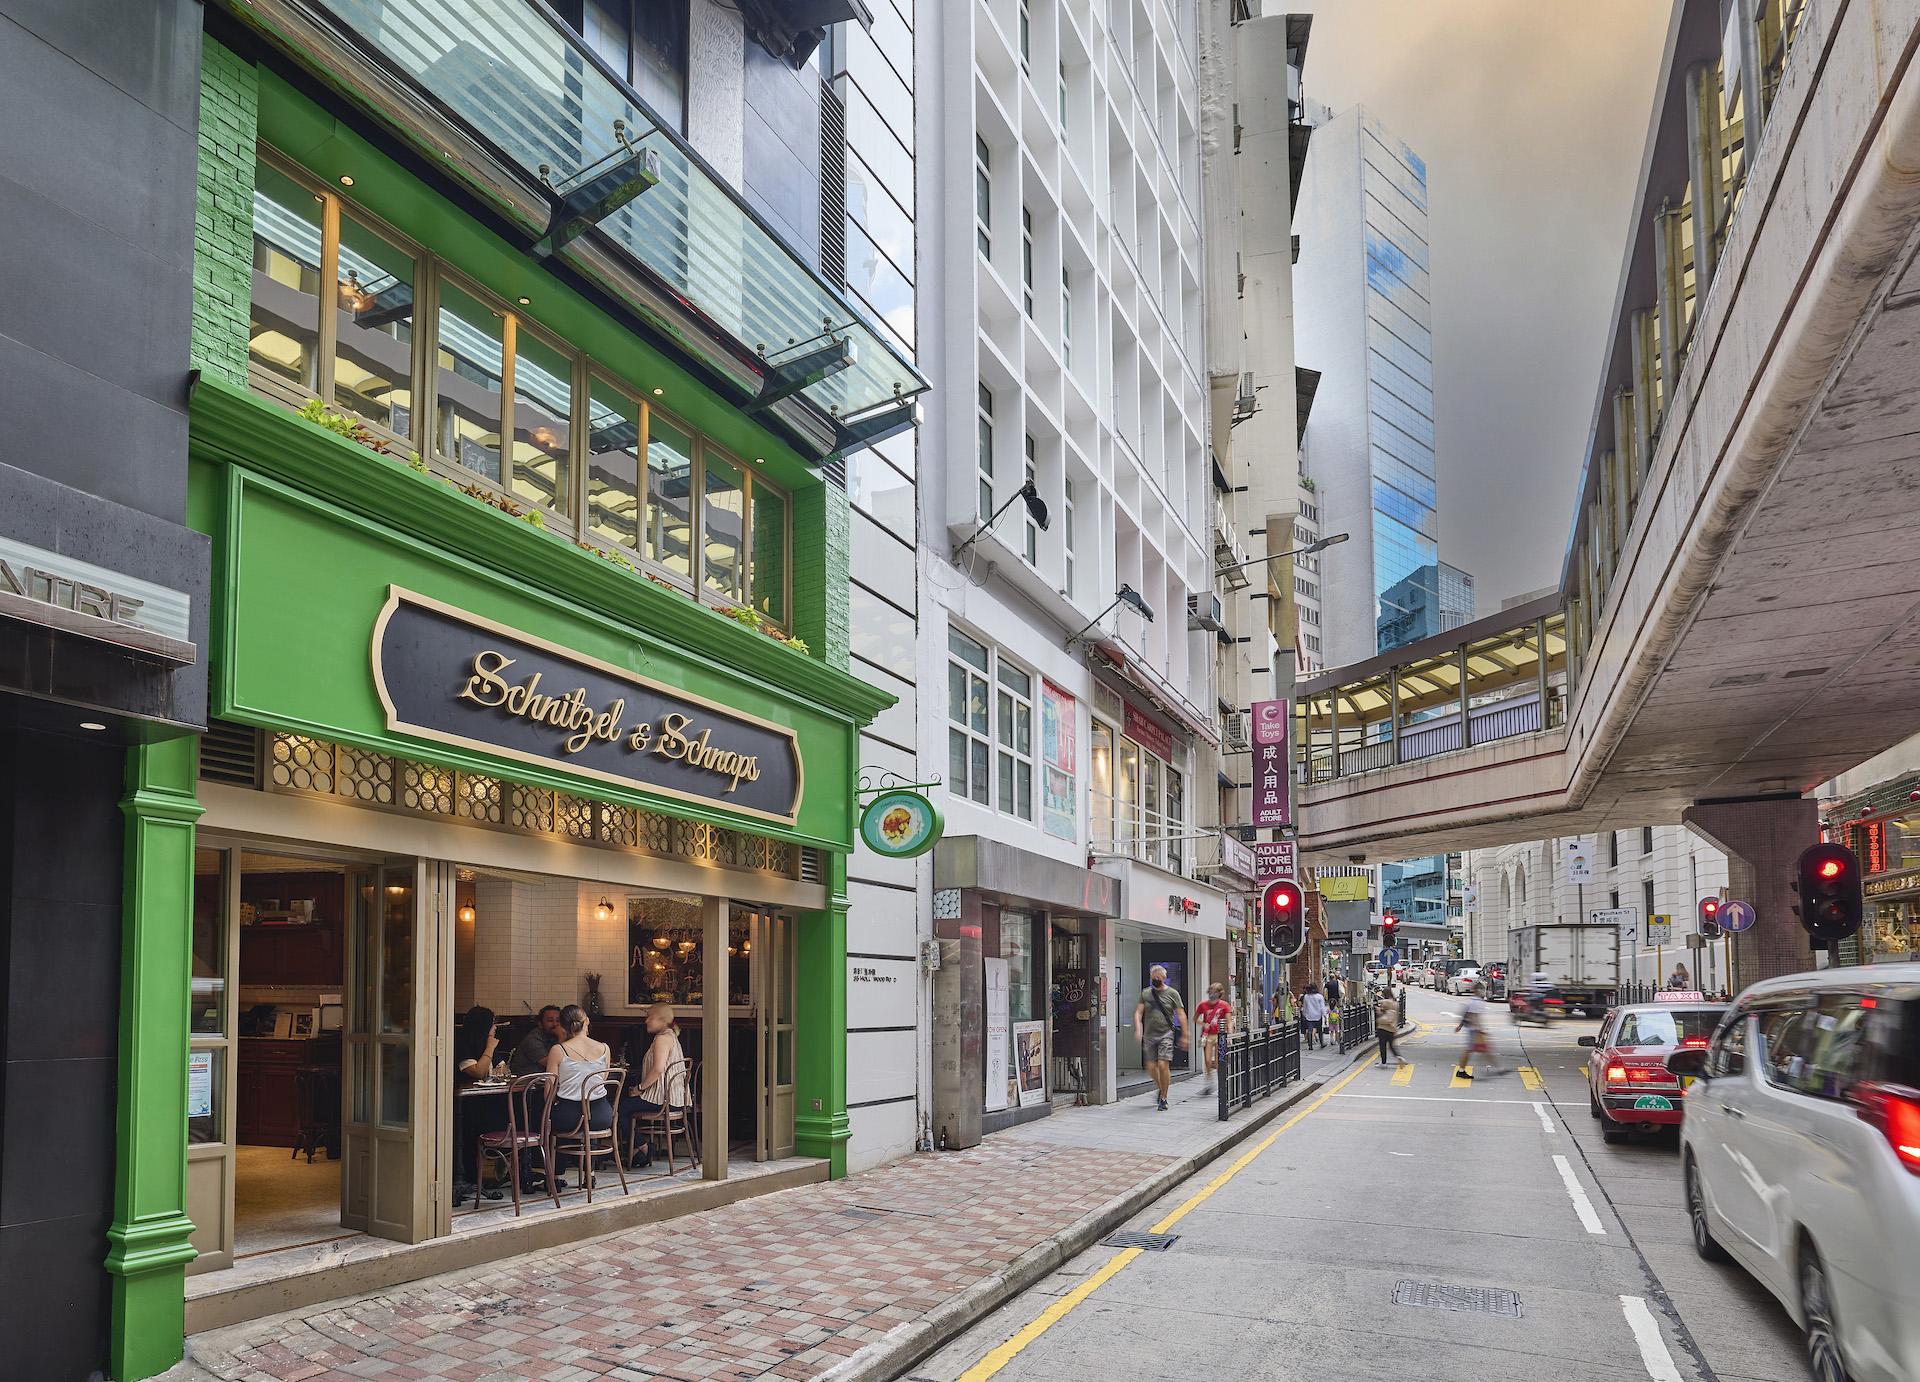 Schnitzel & Schnaps Brings a Touch of European Flair to Hollywood Road